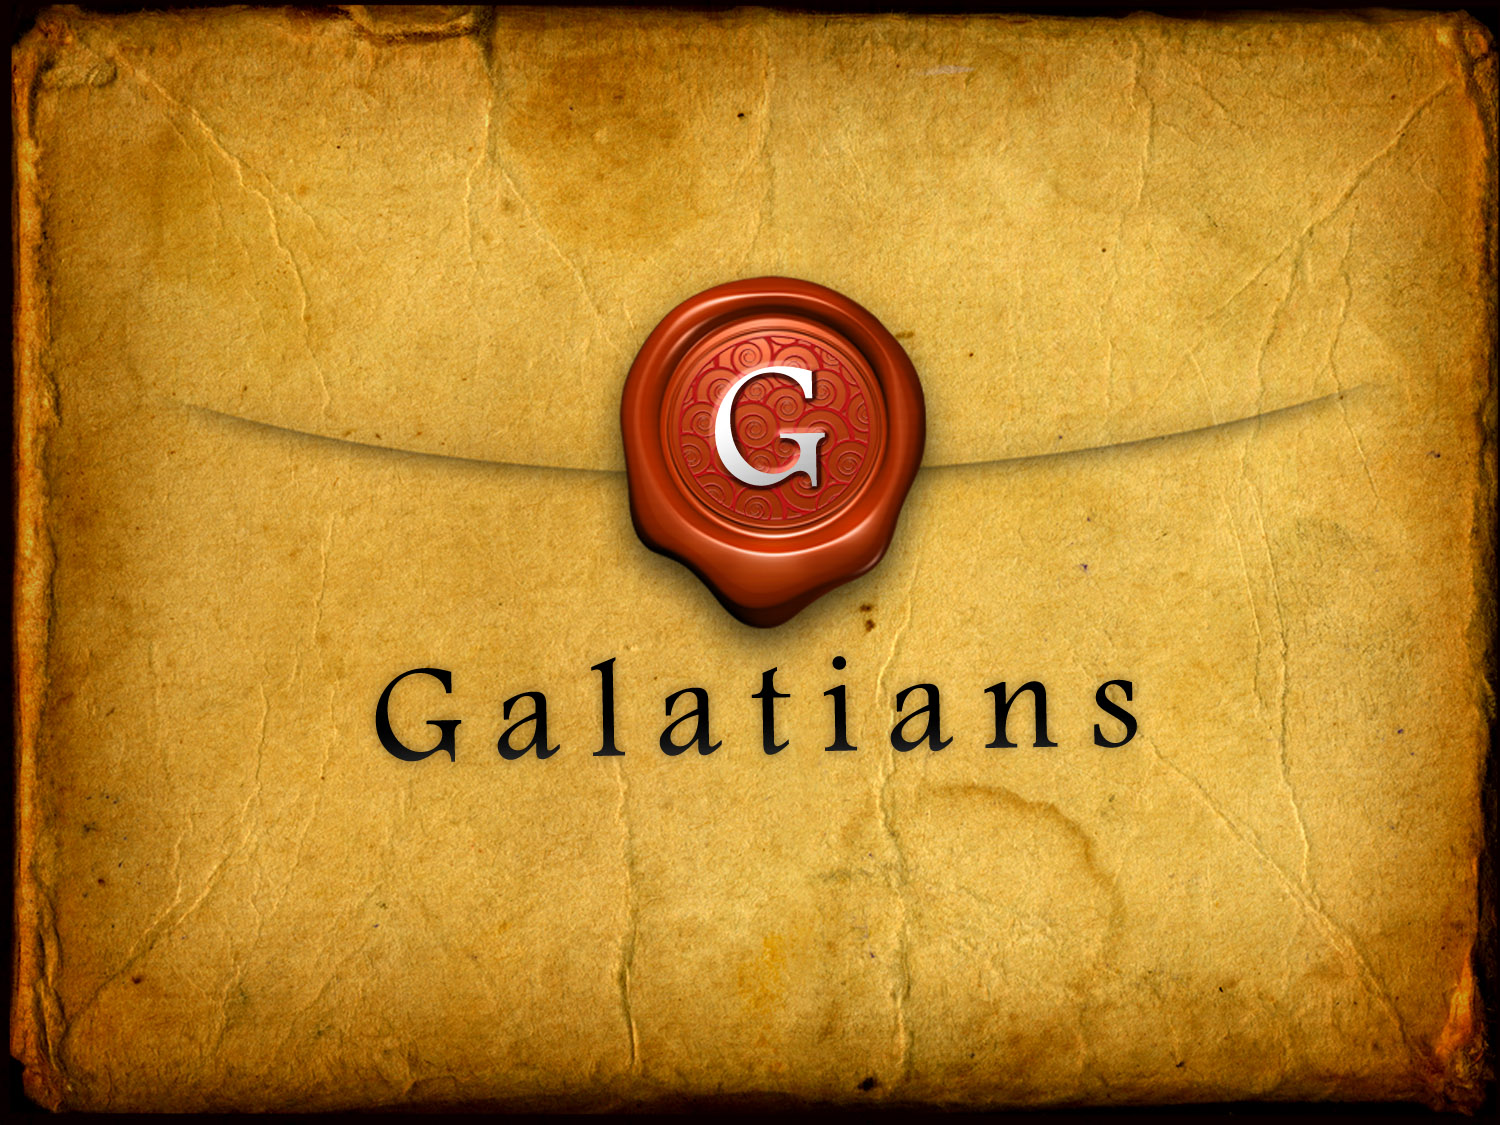 The Book of Galatians 5:22-26